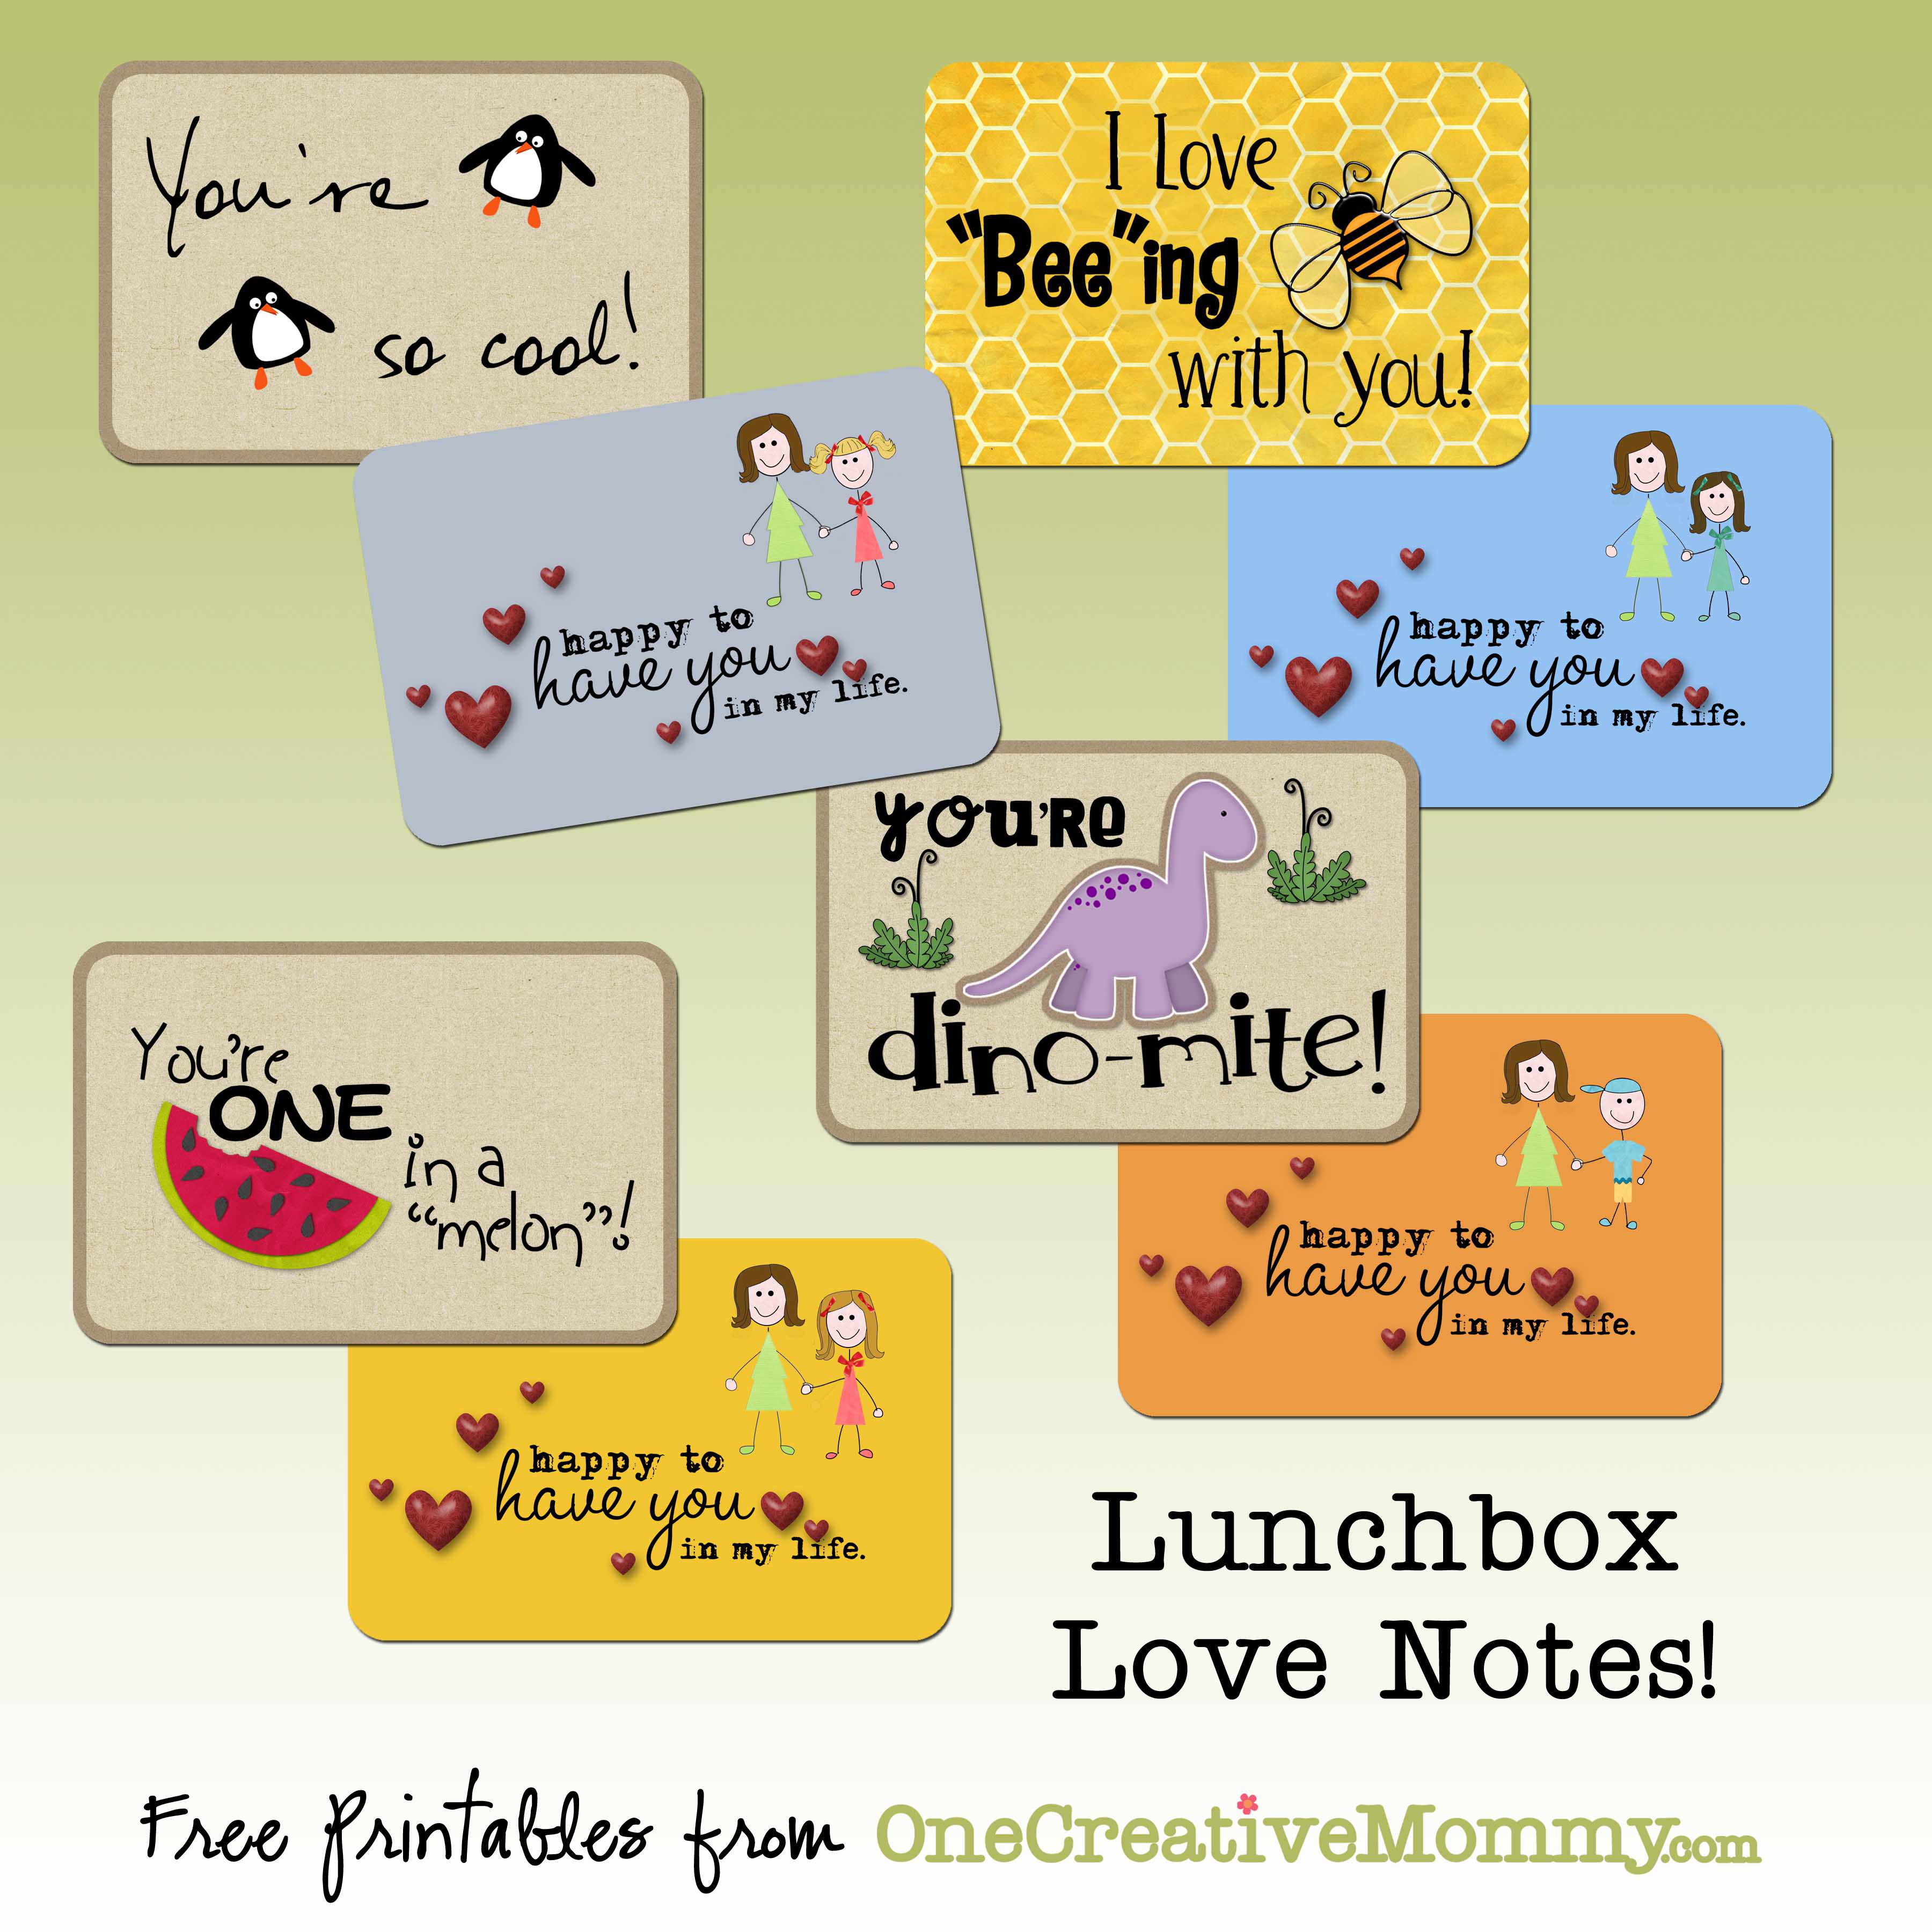 lunchbox-love-notes-onecreativemommy